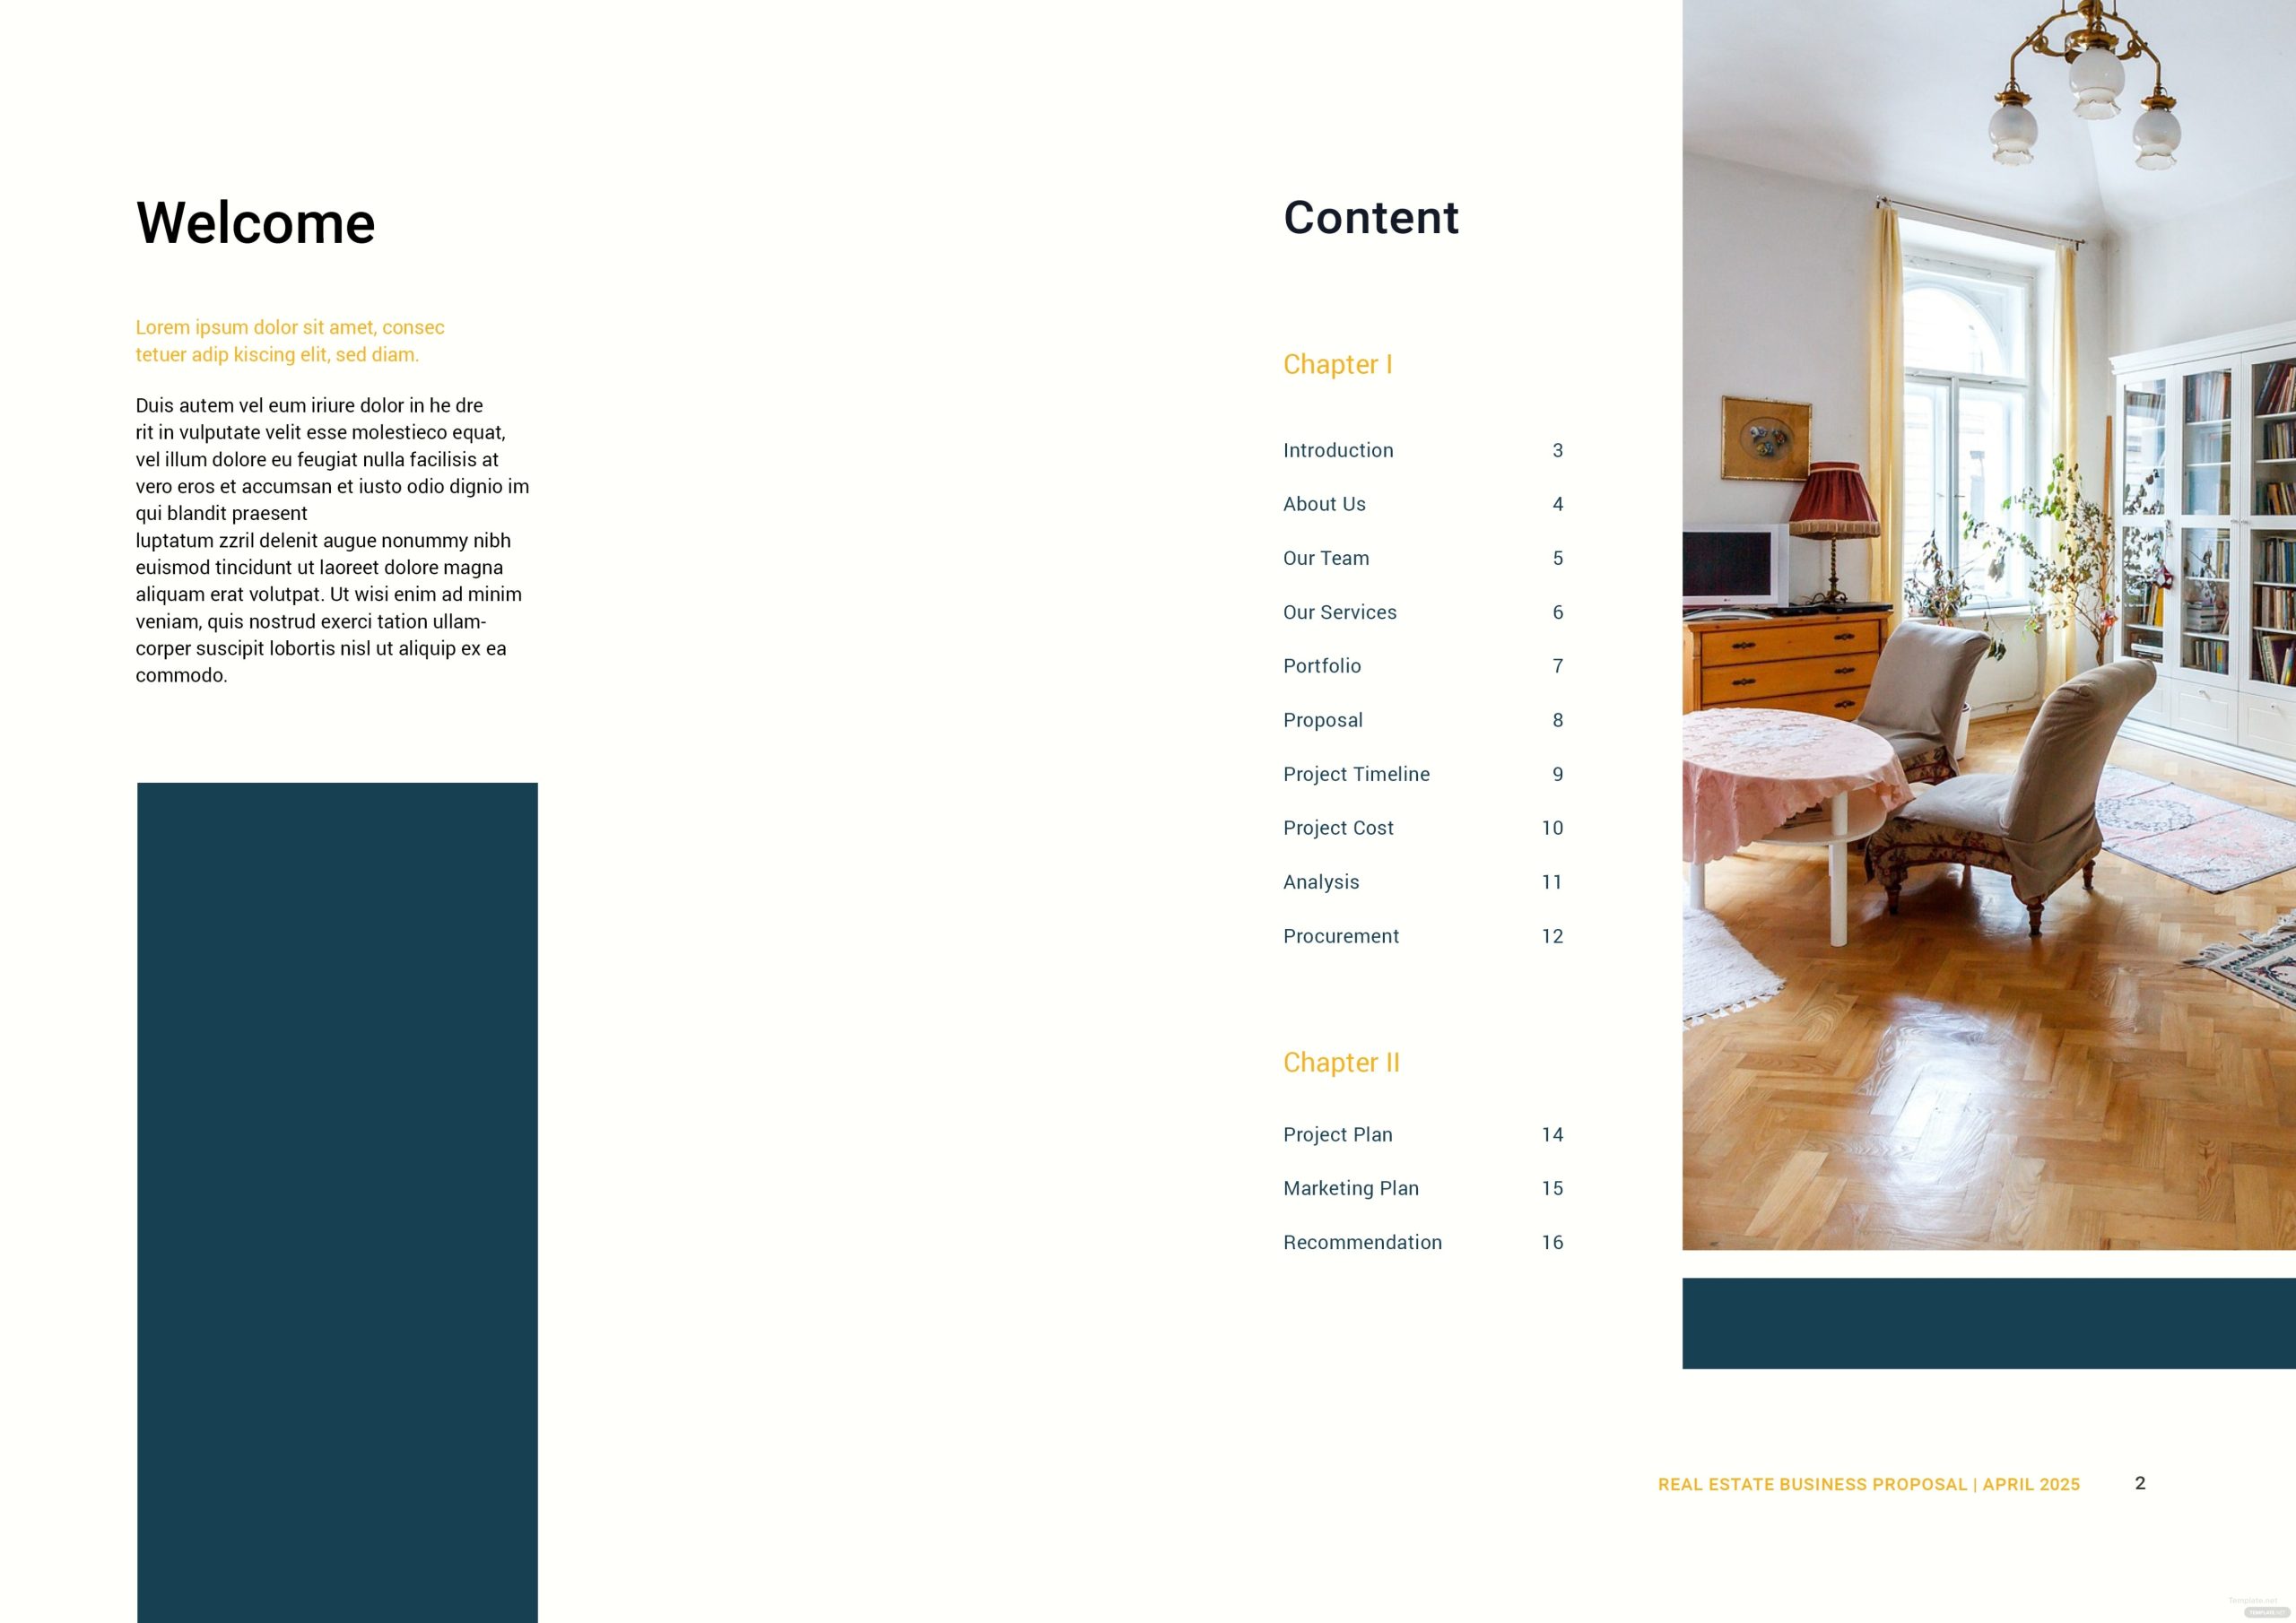 Free Real Estate Business Proposal Template In Adobe Indesign With Real Estate Investment Partnership Business Plan Template